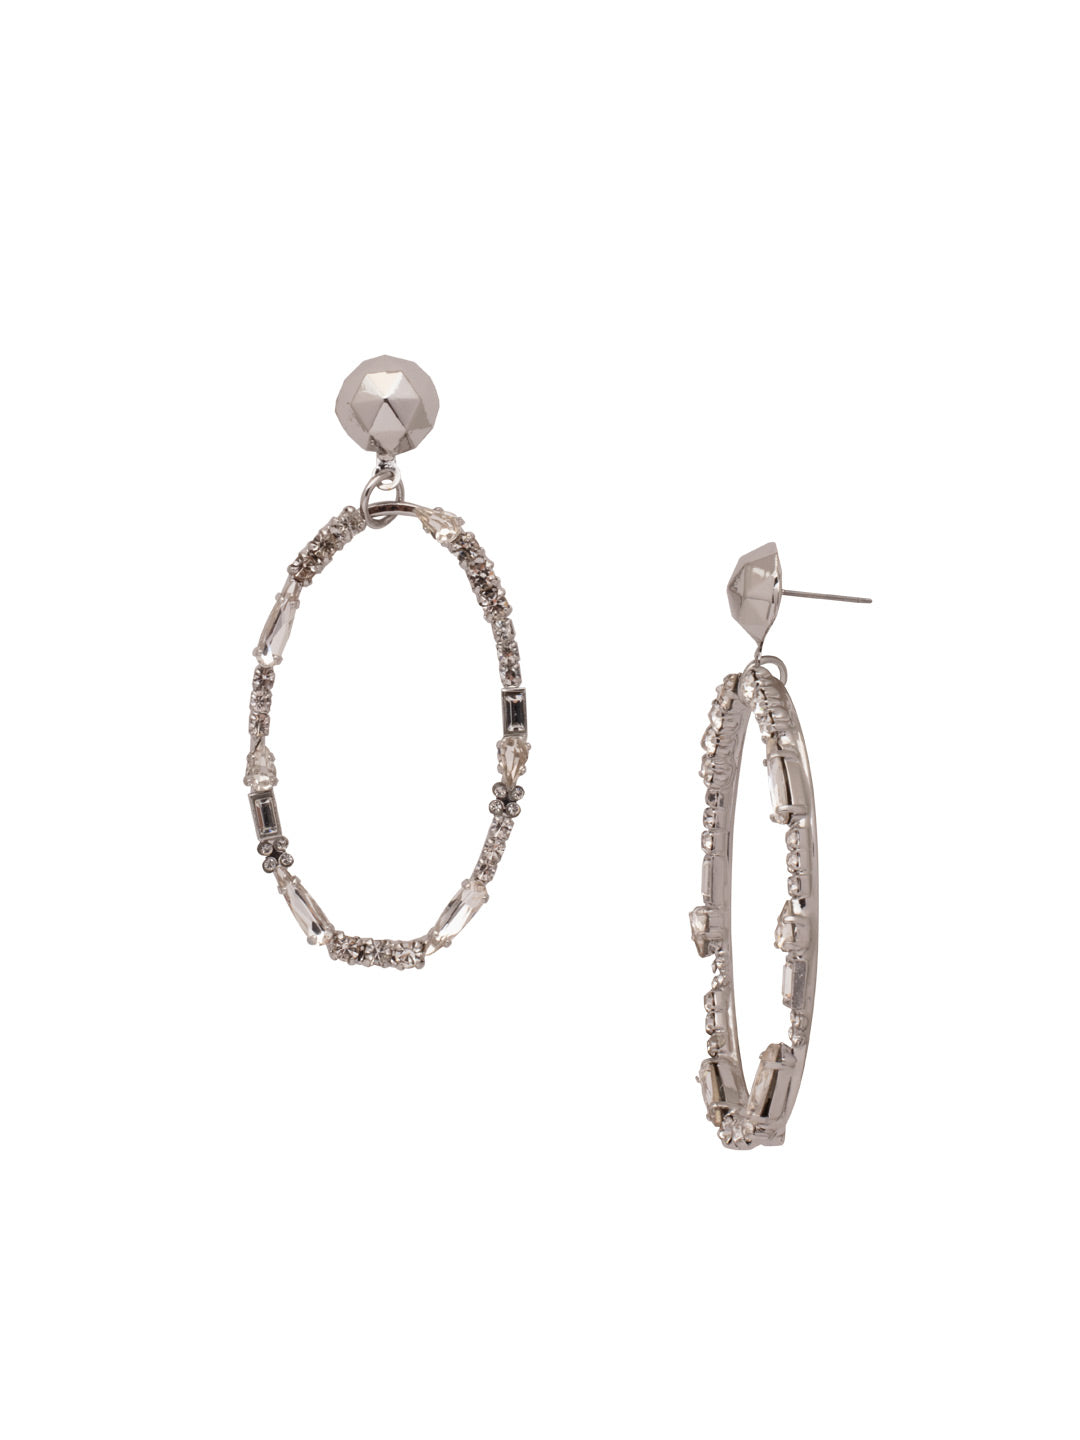 Ruth Statement Earring - EEU5PDCRY - <p>The disco-ball-esque stud on our Ruth Statement Earrings gives way to a major sparkle moment: a hoop encrusted in navette, round, baguette and pear-shaped crystals. From Sorrelli's Crystal collection in our Palladium finish.</p>